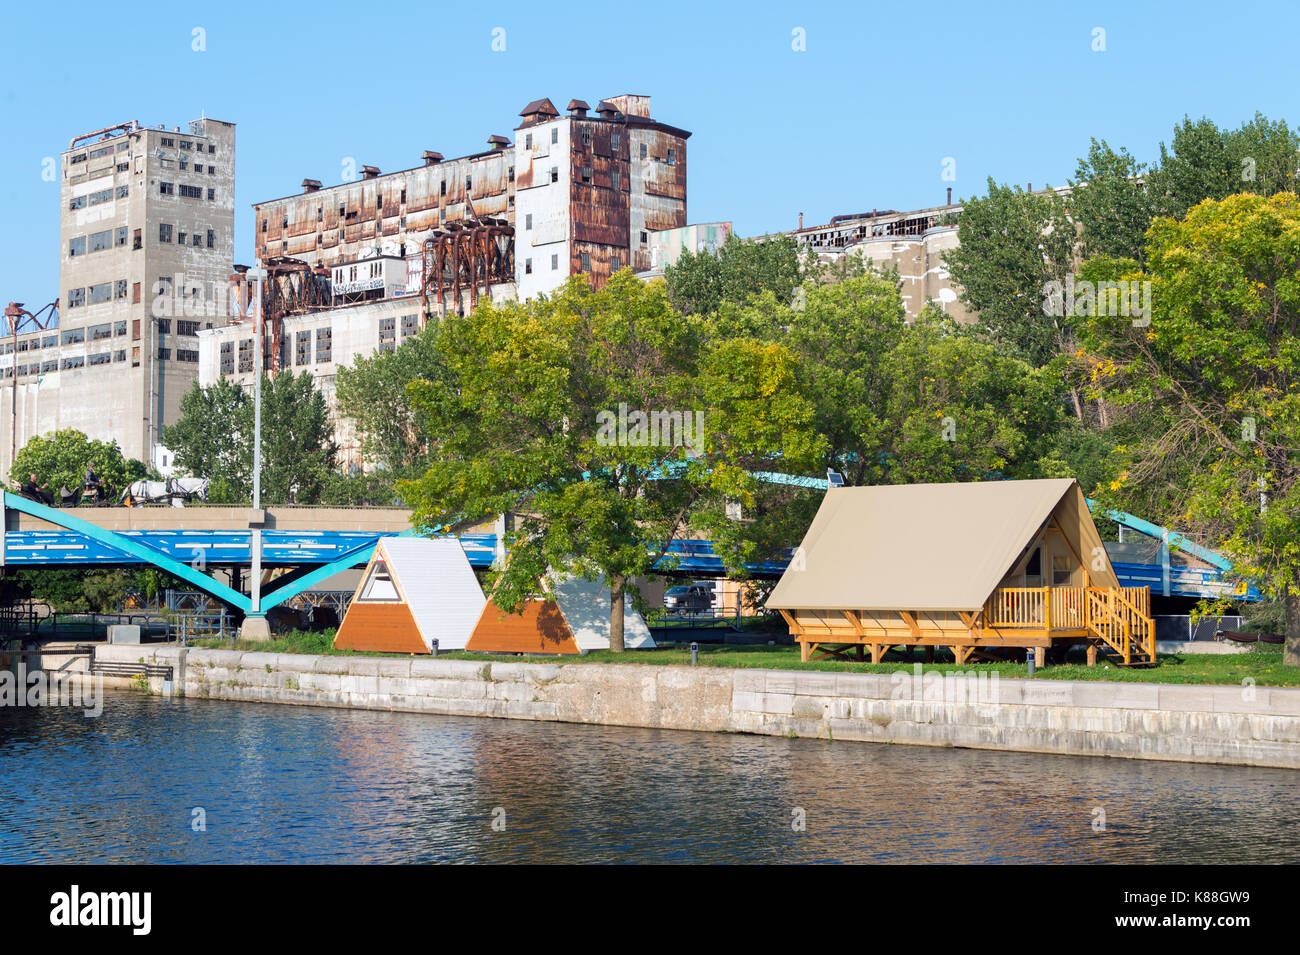 Montreal, CA - 17 September 2017: The Village by the locks in the Old Port of Montreal is a new lodging experience combining urban camping and boating Stock Photo